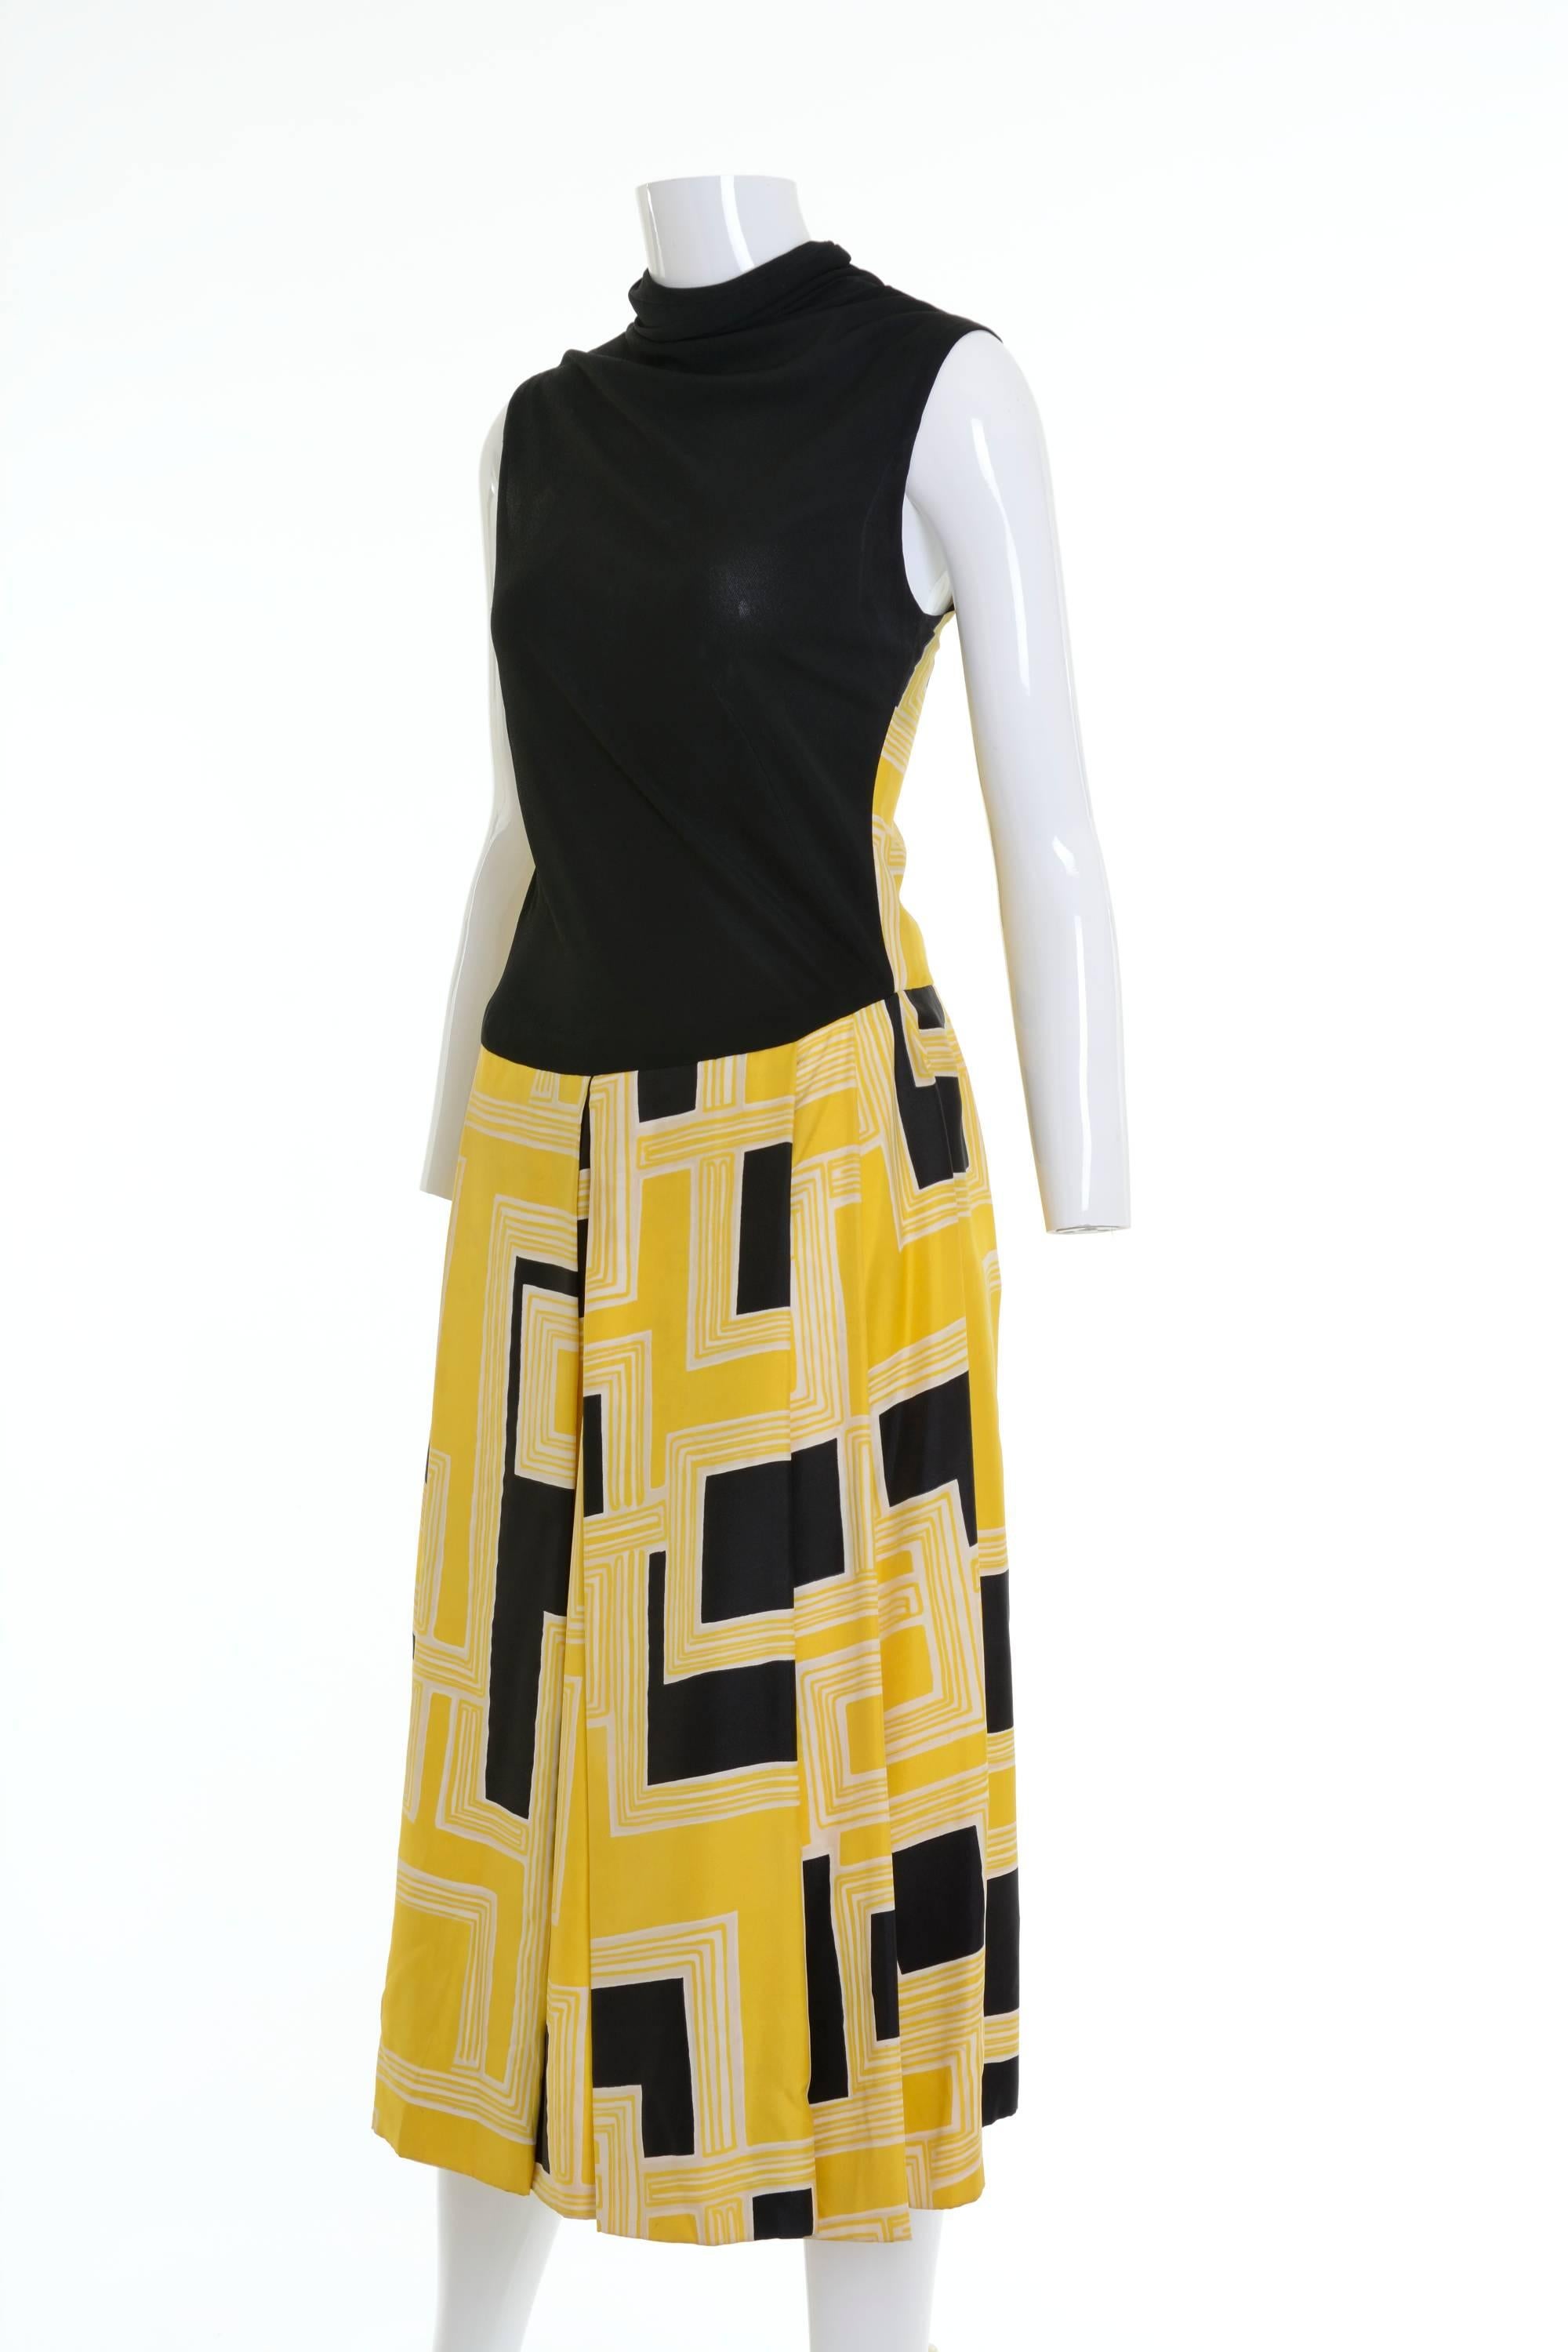 This gorgeous 1950s PIROVANO dress is in black jersey and yellow and black geometric print silk fabric. It has two side pockets, turtle neck and back zip closure and button.

Good Vintage Condition 

Lebel: Piovano Monte Napoleone 
Material: